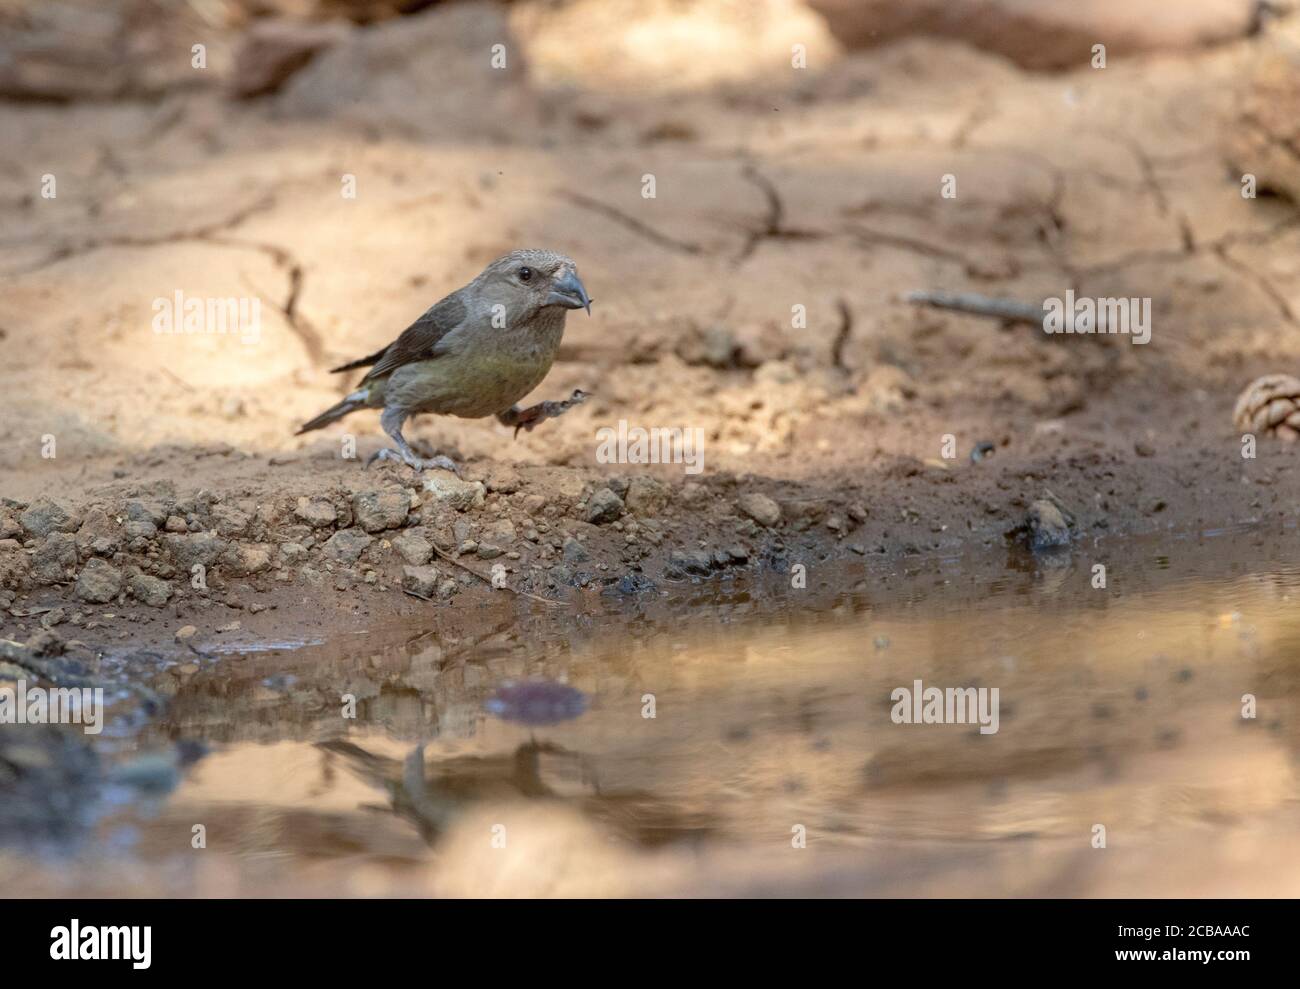 Cyprus red crossbill (Loxia curvirostra guillemardi, Loxia guillemardi), female walking thirsty to a puddle in a forest, side view, Cyprus, Trodos Mountain Stock Photo